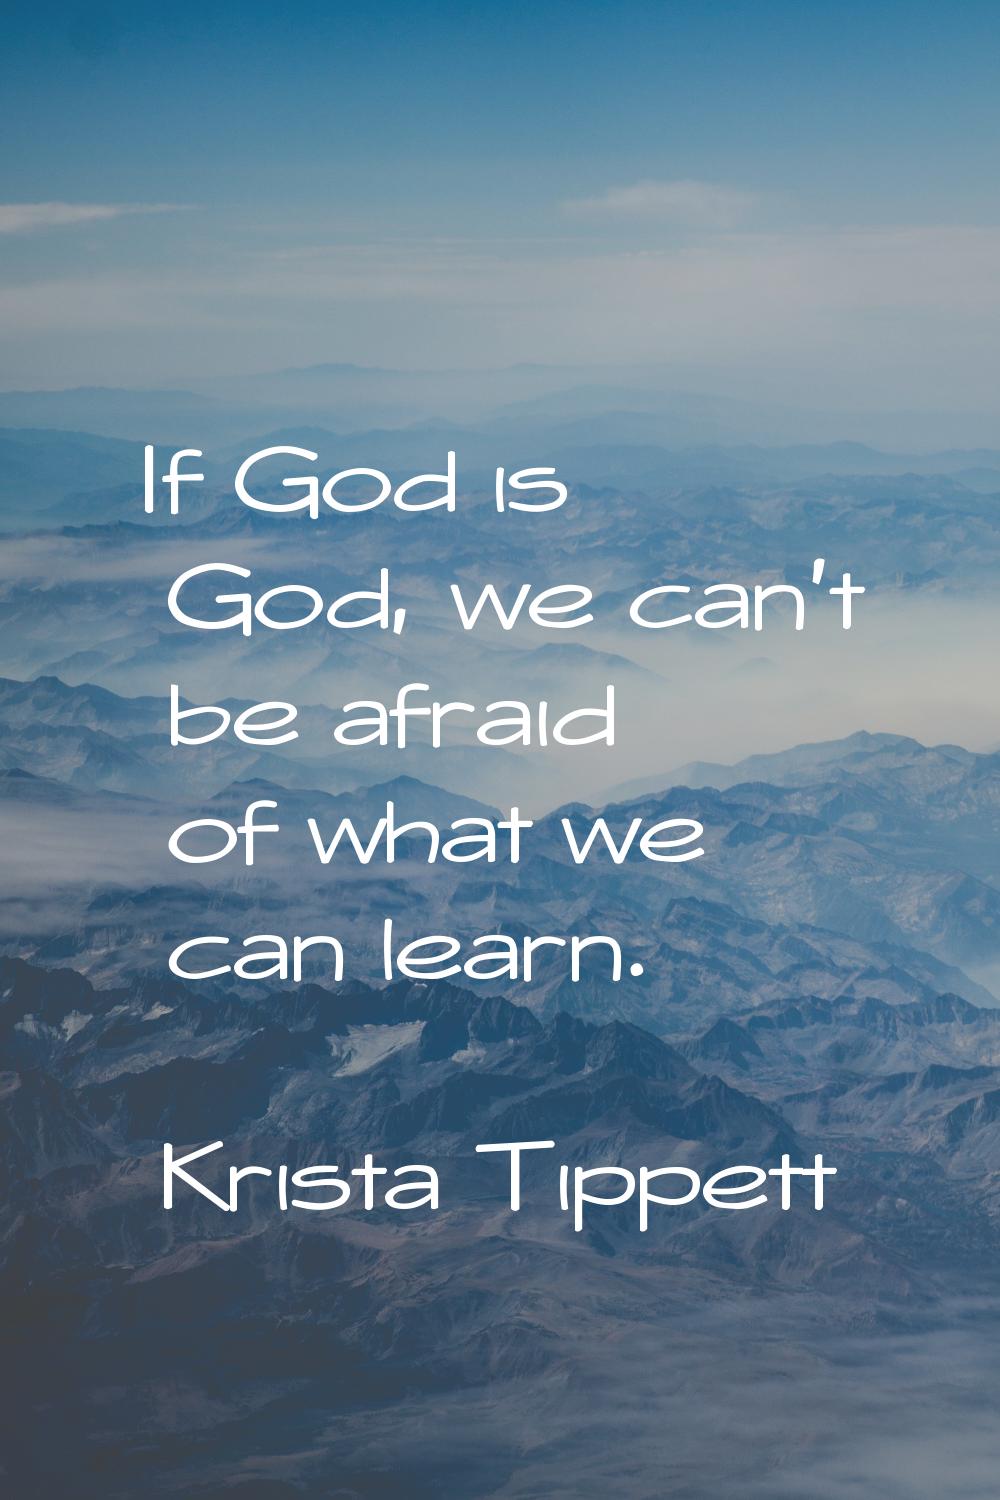 If God is God, we can't be afraid of what we can learn.